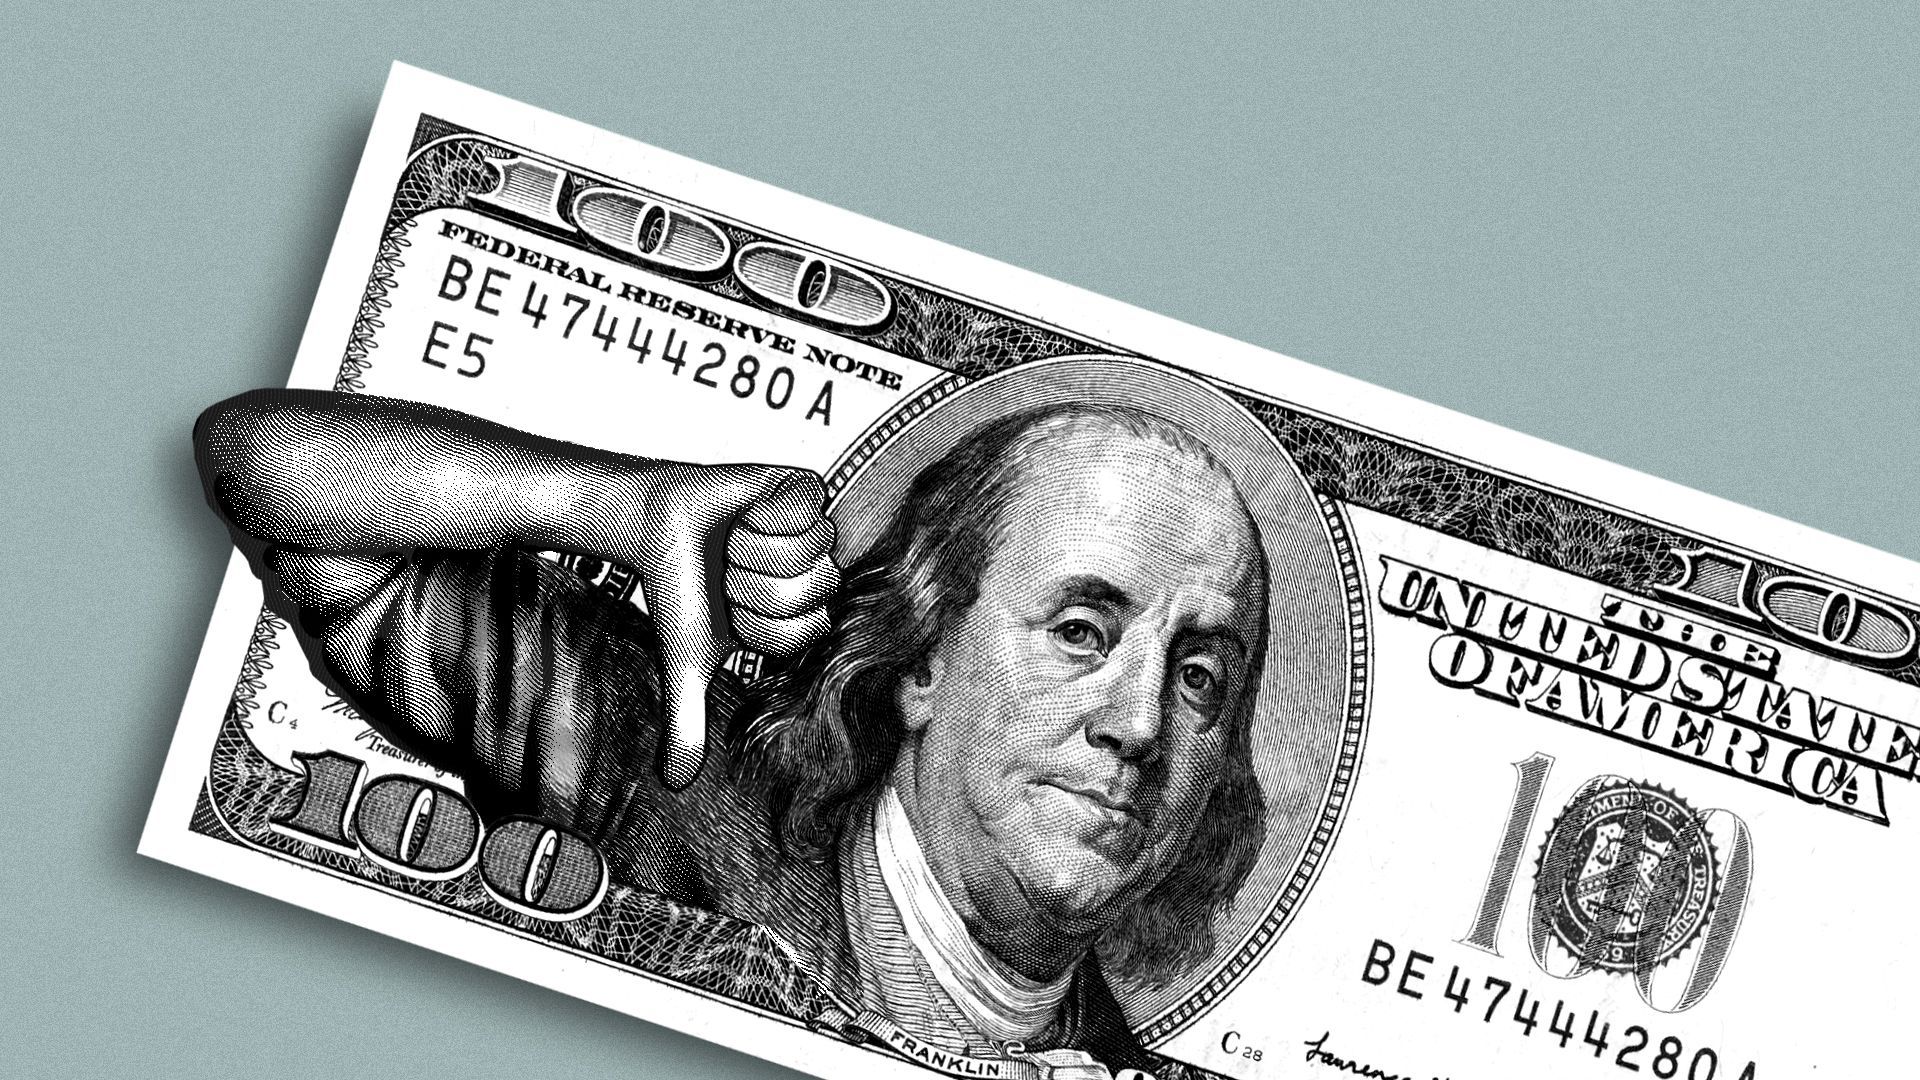 Illustration of Benjamin Franklin holding a thumbs down on the one hundred dollar bill